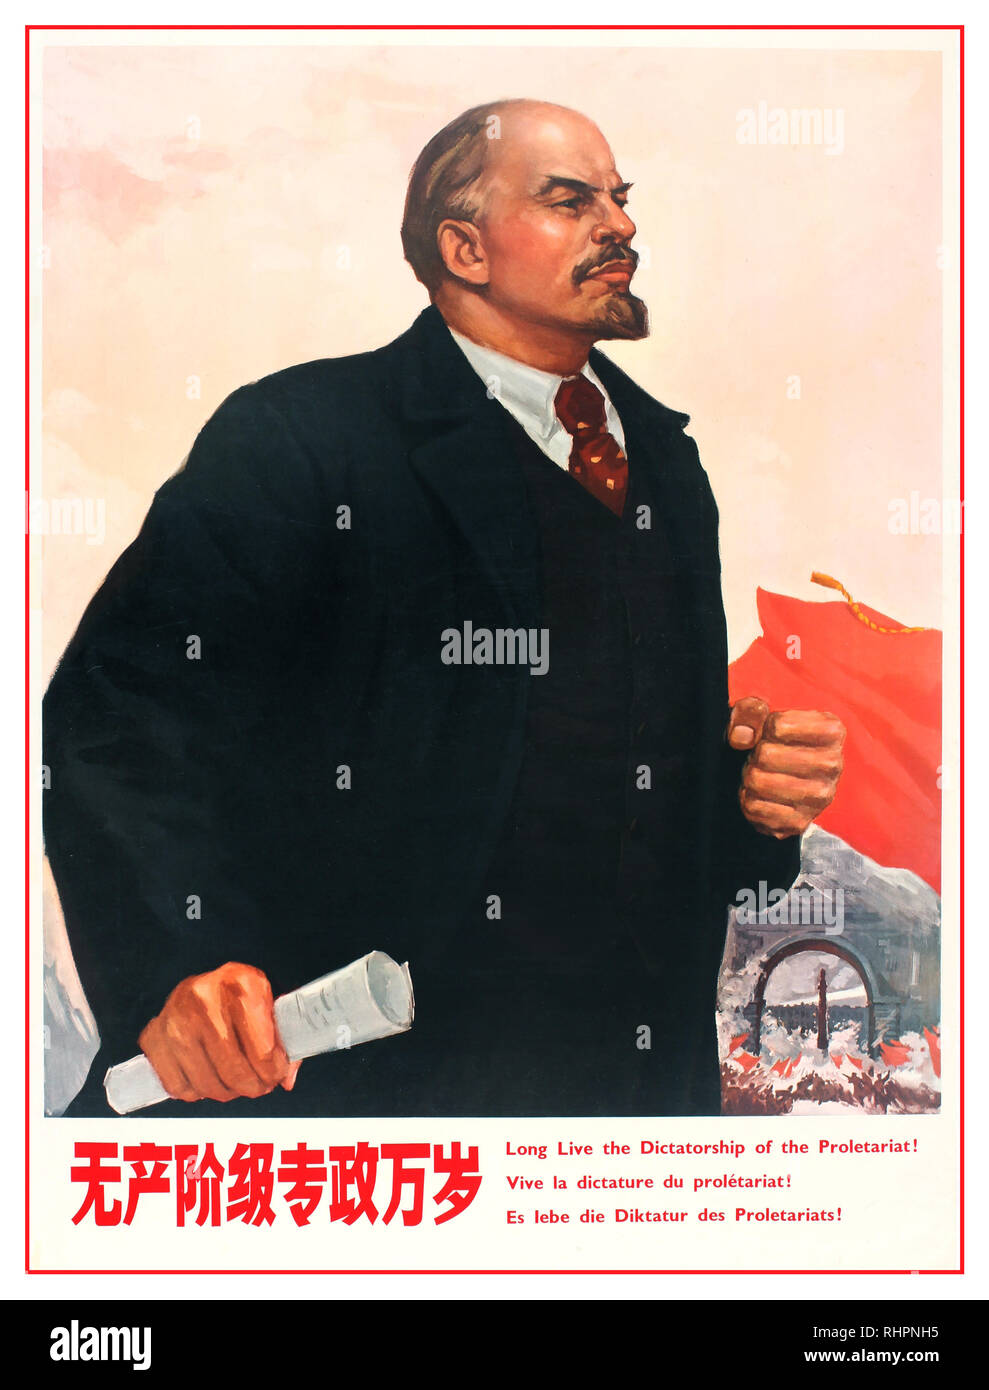 1980’s Chinese Propaganda poster..by example - Lenin - ‘Long Live the Dictatorship of the Proletariat’ !  Communist China 1986. Stock Photo